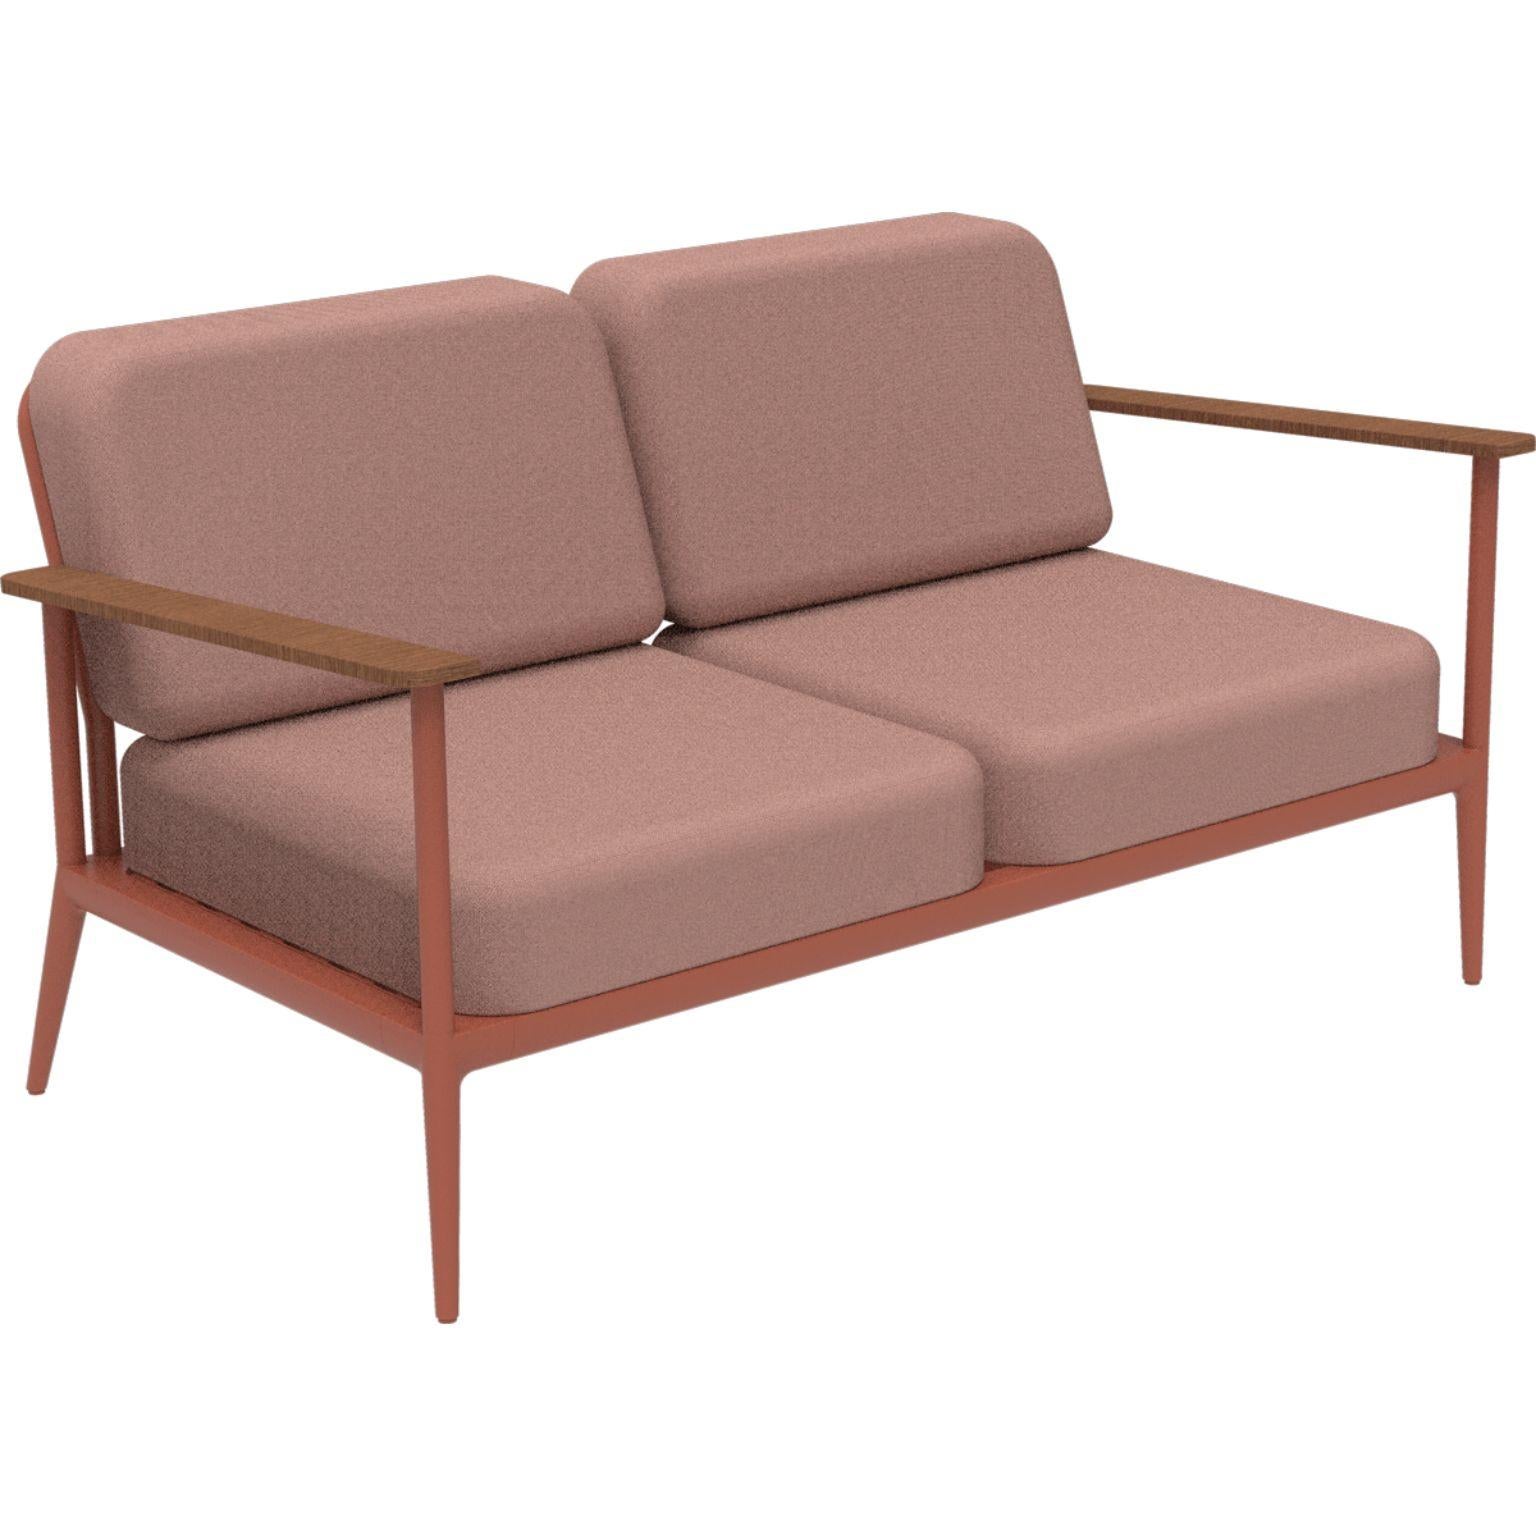 Nature Salmon sofa by MOWEE
Dimensions: D85 x W151 x H81 cm (seat height 42 cm).
Material: Aluminum, upholstery and Iroko Wood.
Weight: 32 kg.
Also available in different colors and finishes.

An unmistakable collection for its beauty and